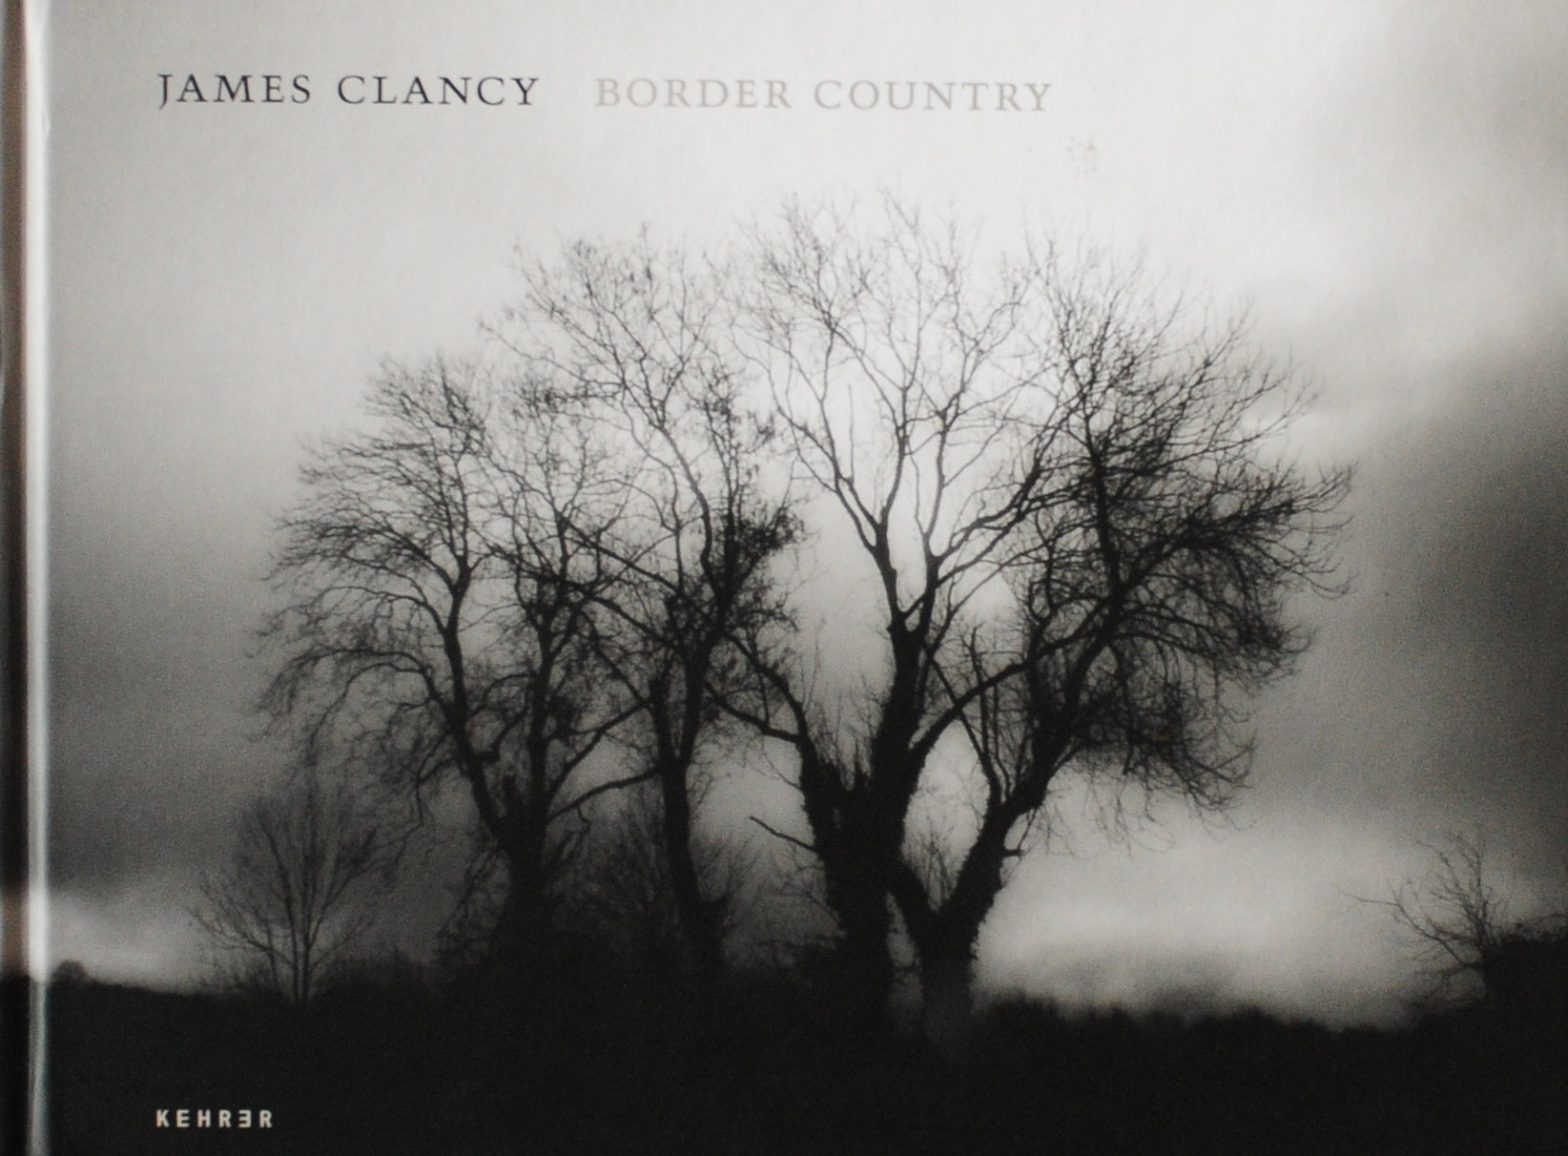 Border Country, James Clancy